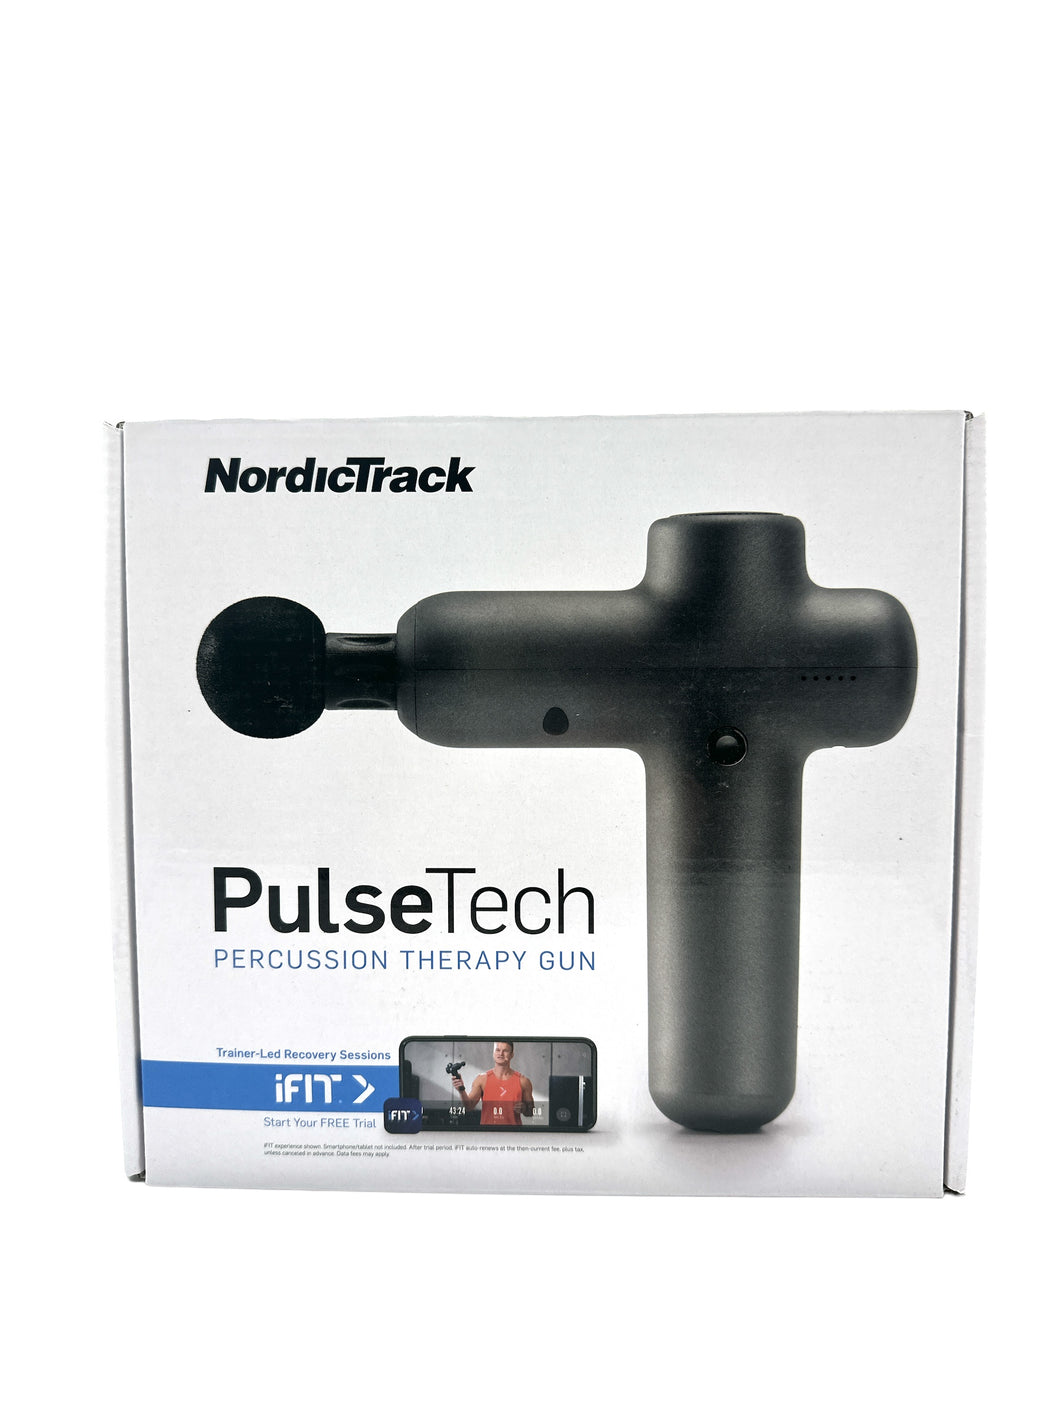 NEW NordicTrack PulseTech Percussion Therapy Gun with 4 Massage Heads MSRP $139